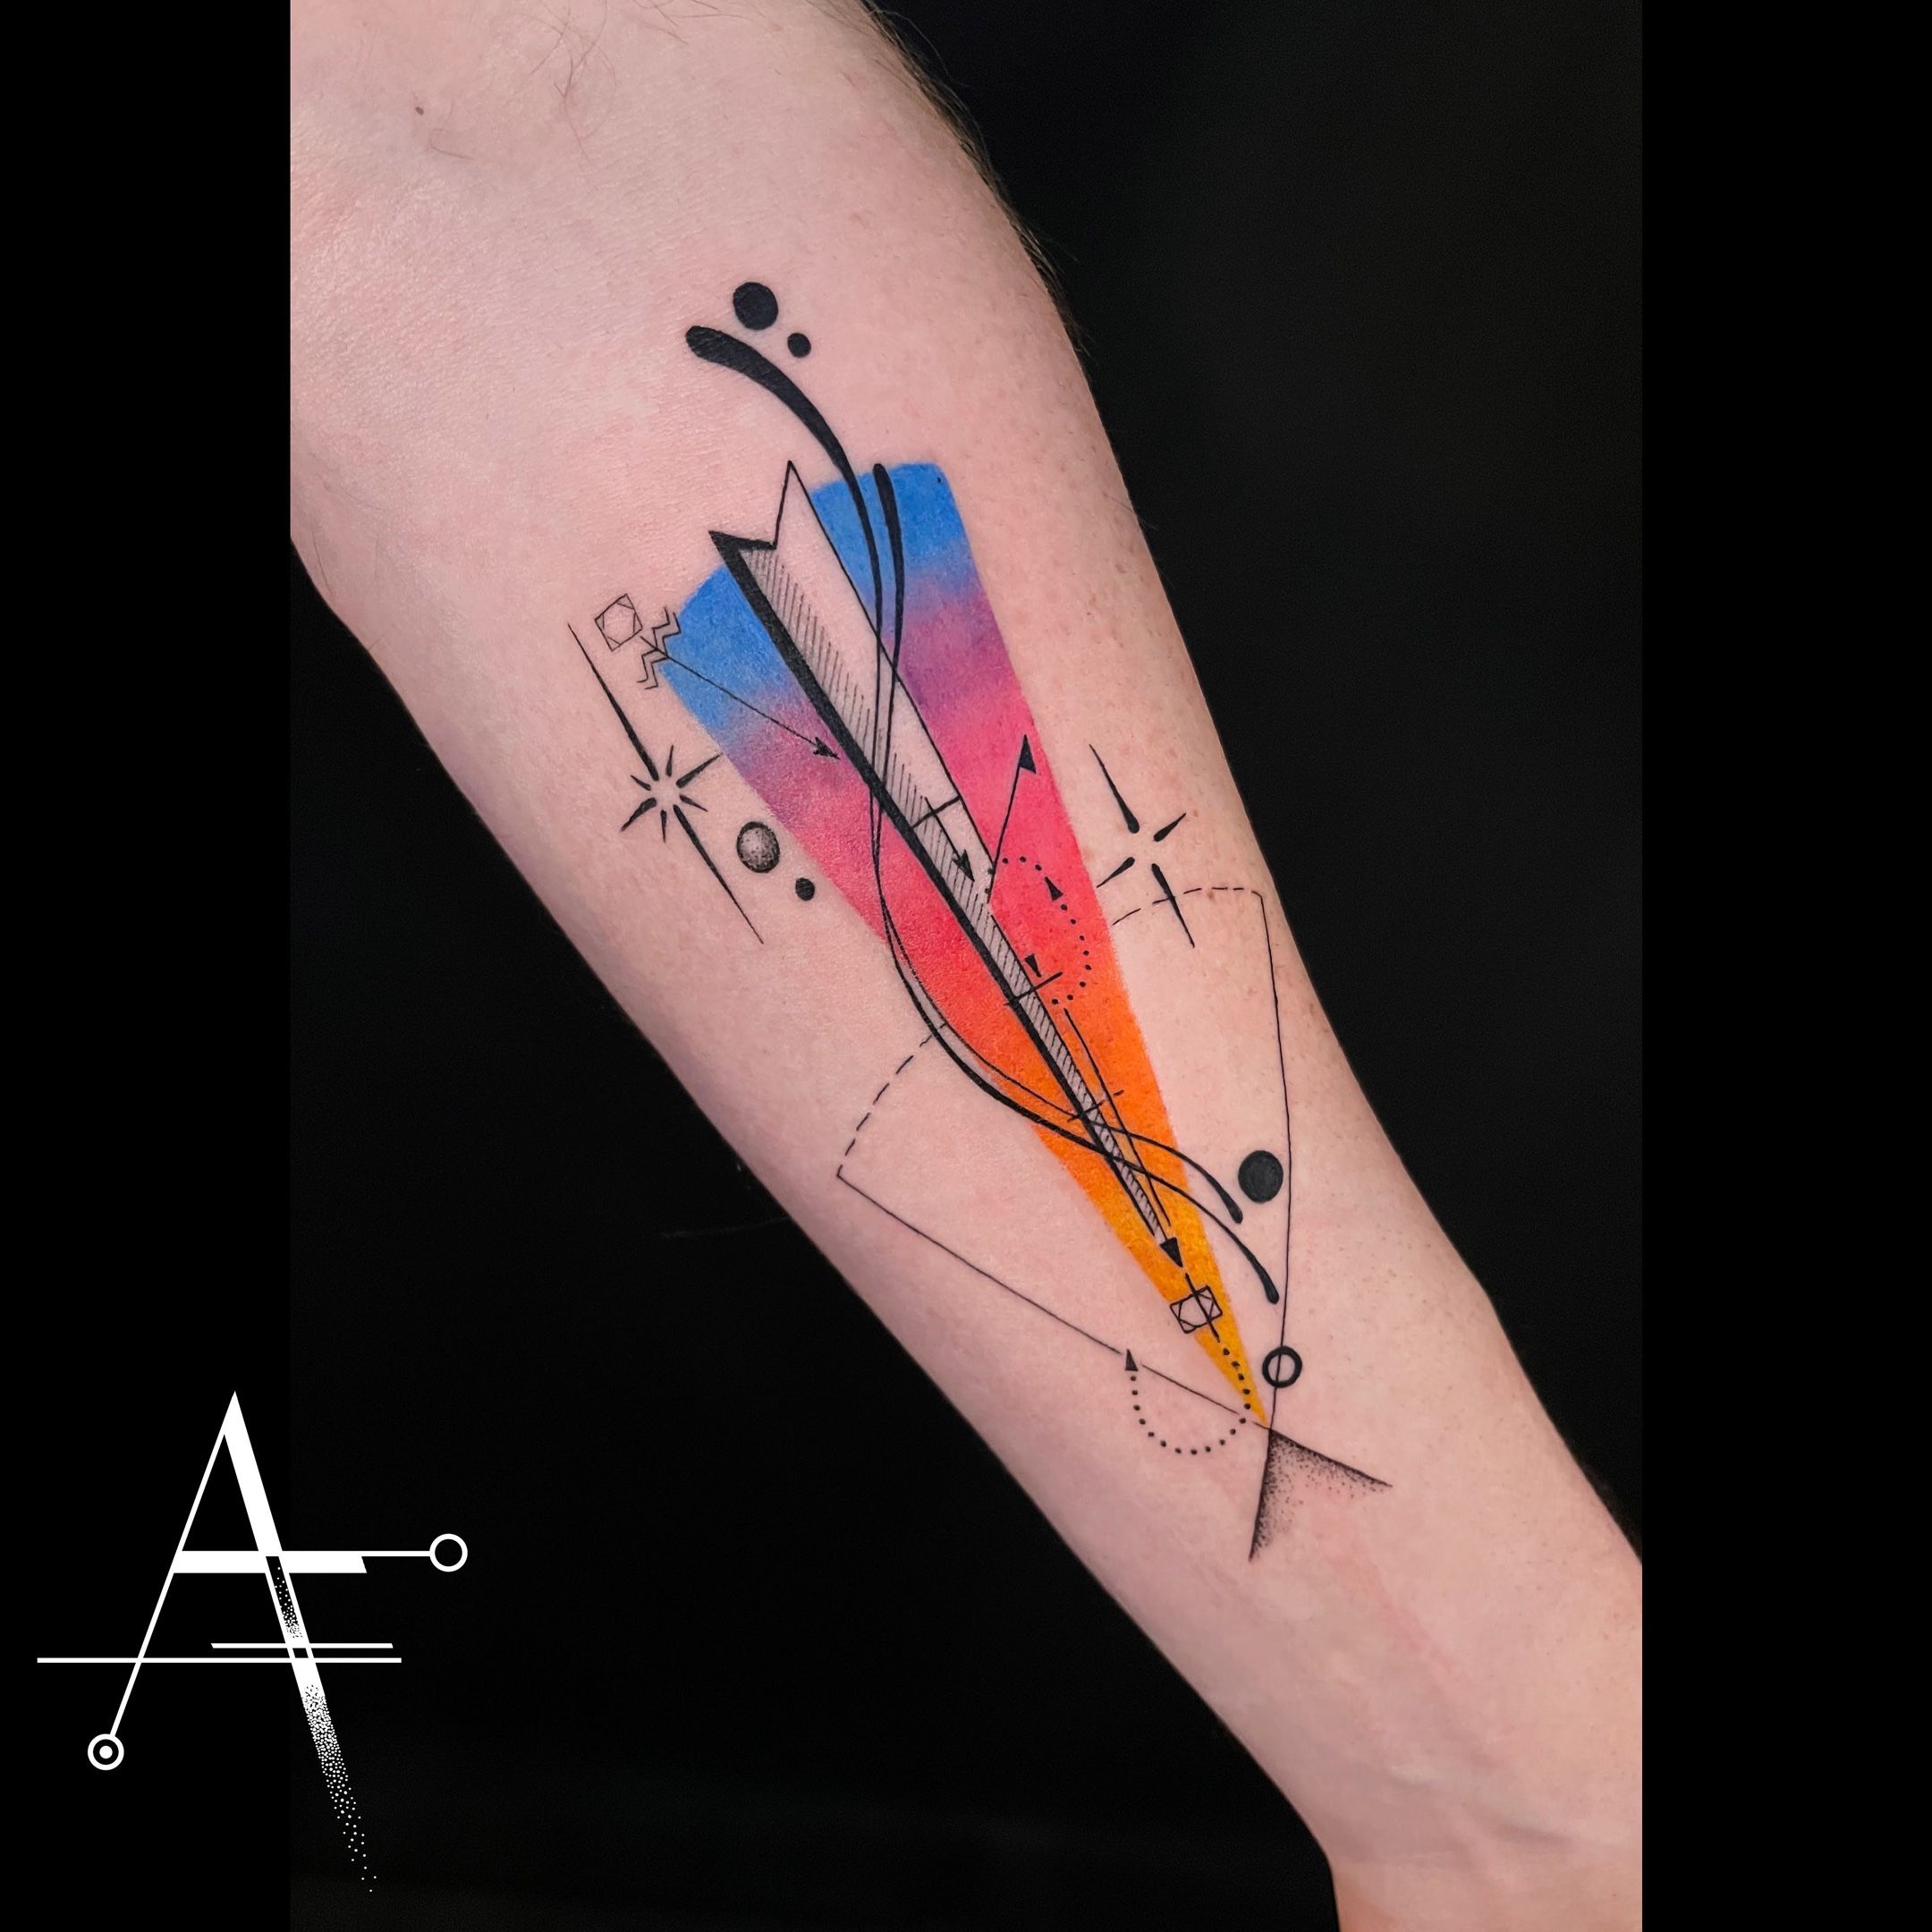 Angel Rose - Here's my super cool schematic tattoo from the most recent  episode of Ink Master. I decided to do a camera because during my time at  film school, I spent